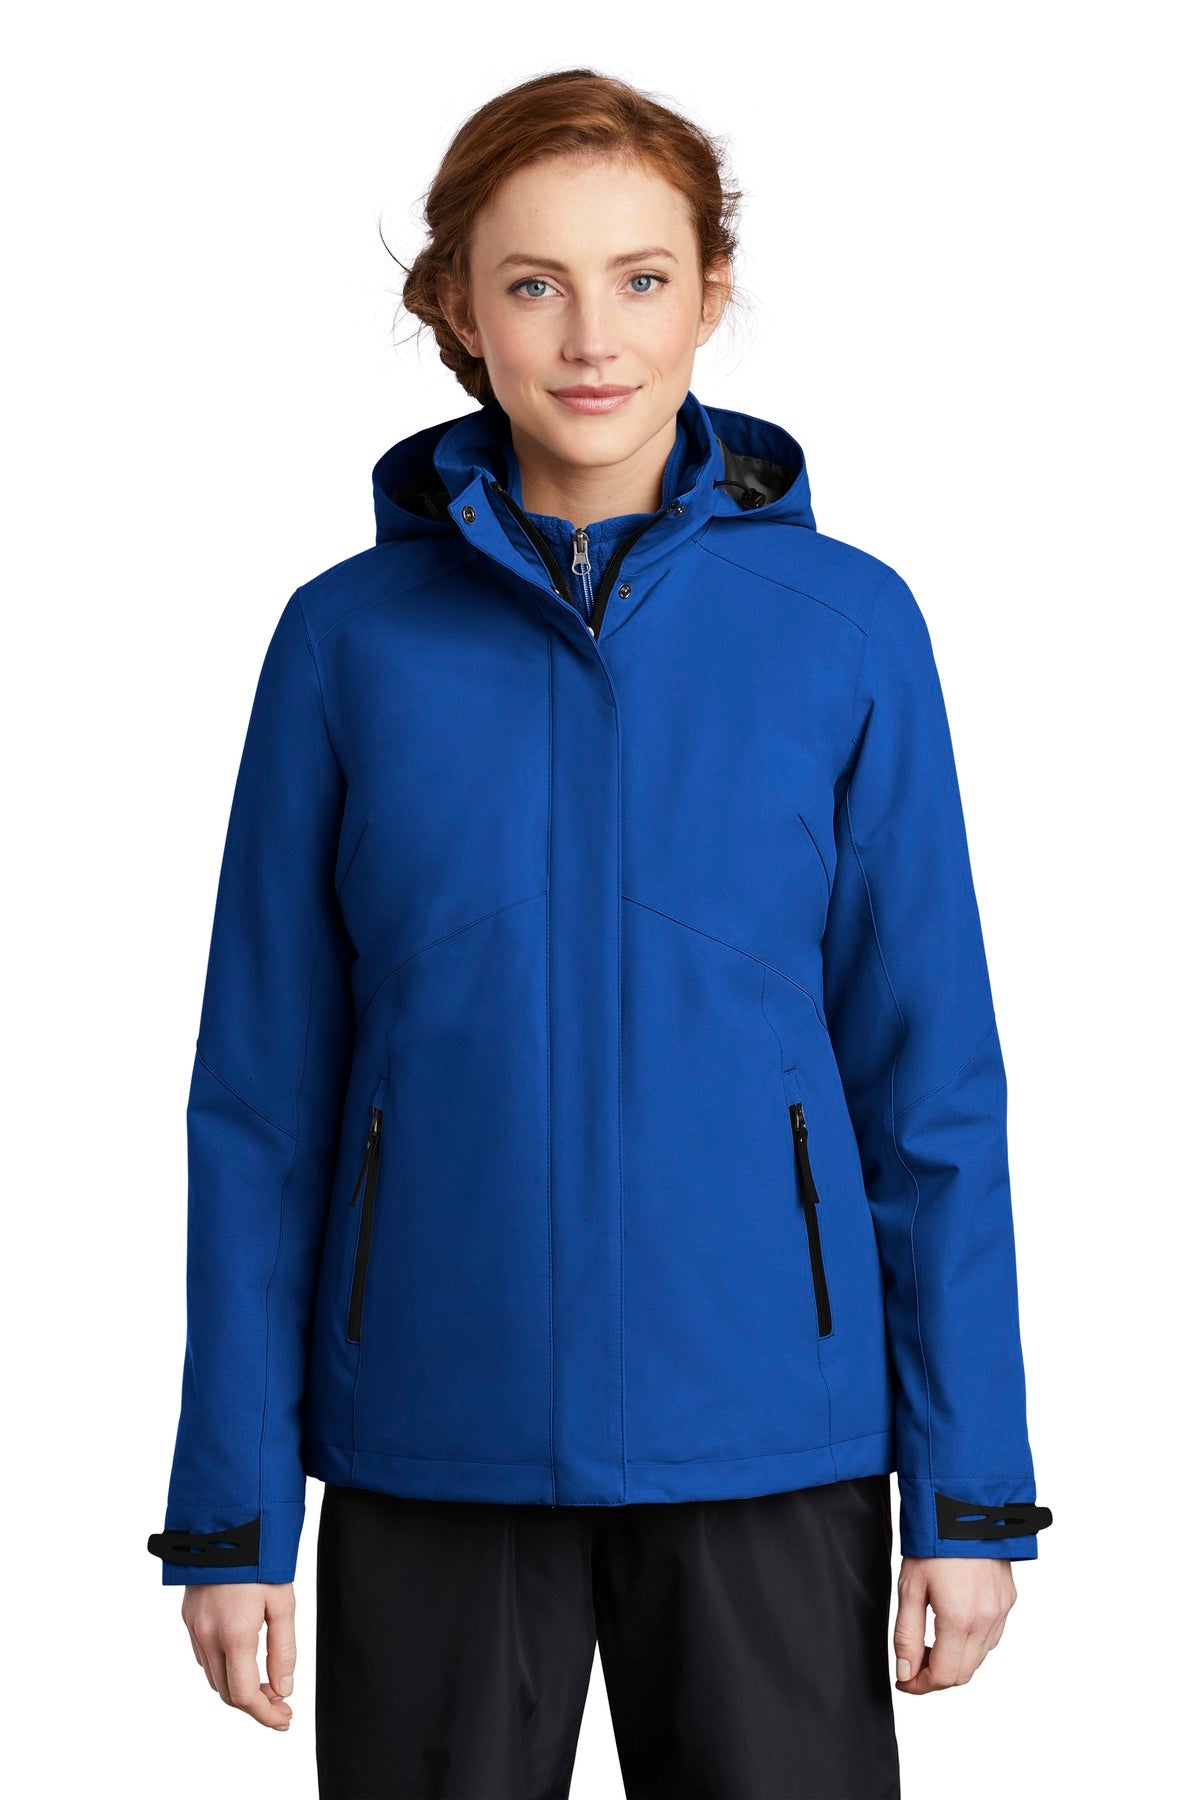 Port Authority Ladies Insulated Waterproof Tech Jacket L405